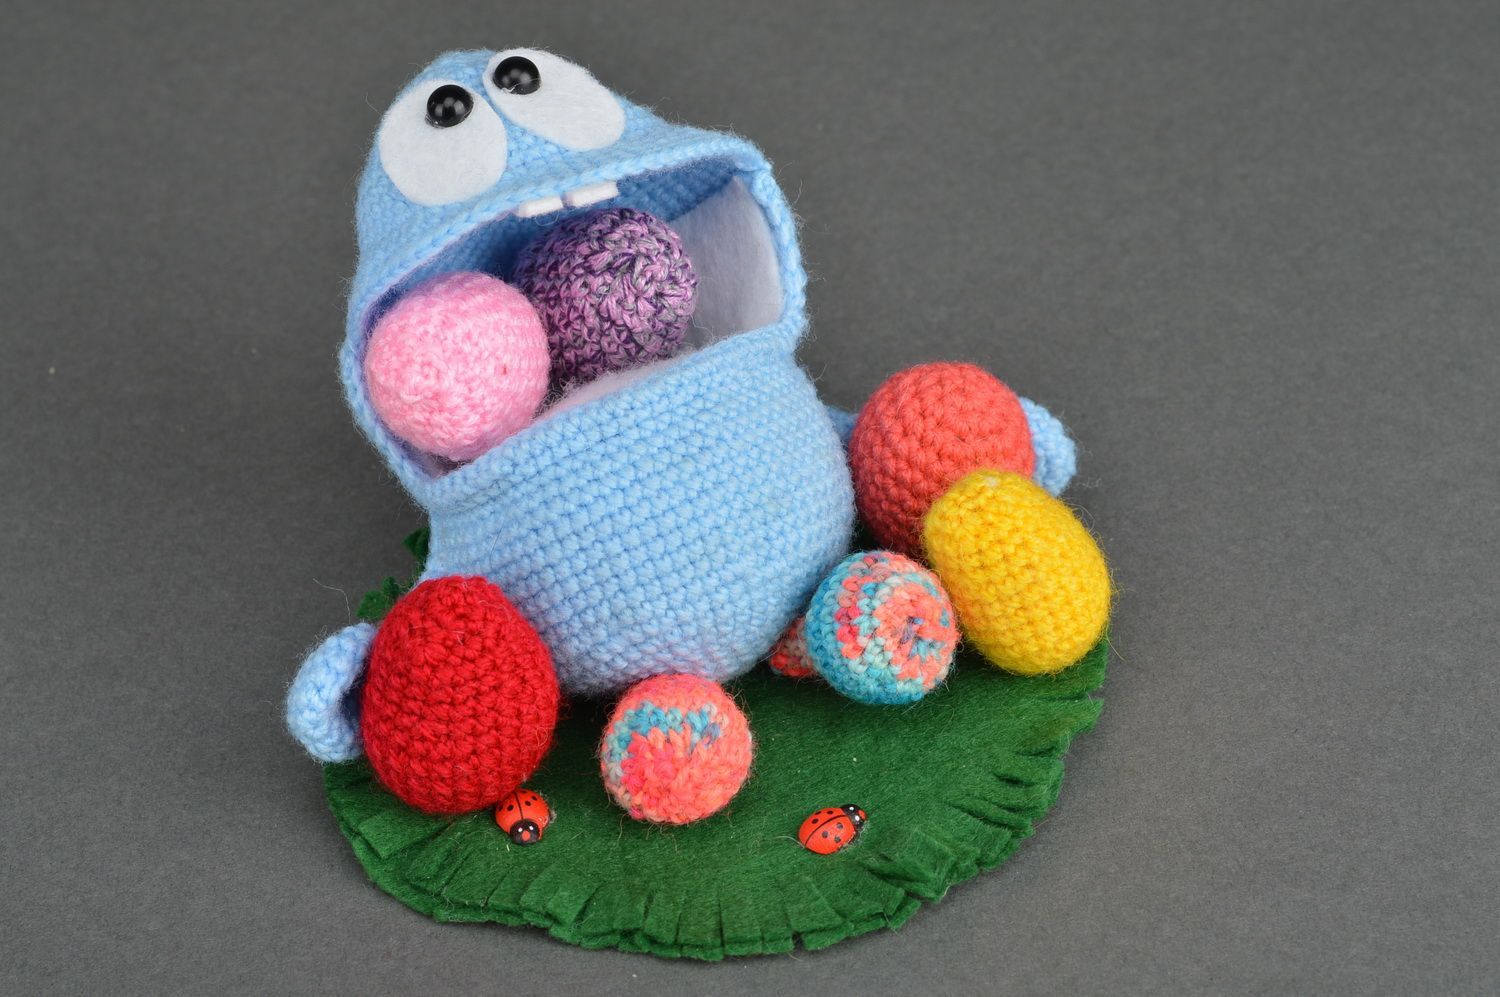 Handmade small crocheted soft toy blue funny creature for kids over 3 years old photo 2